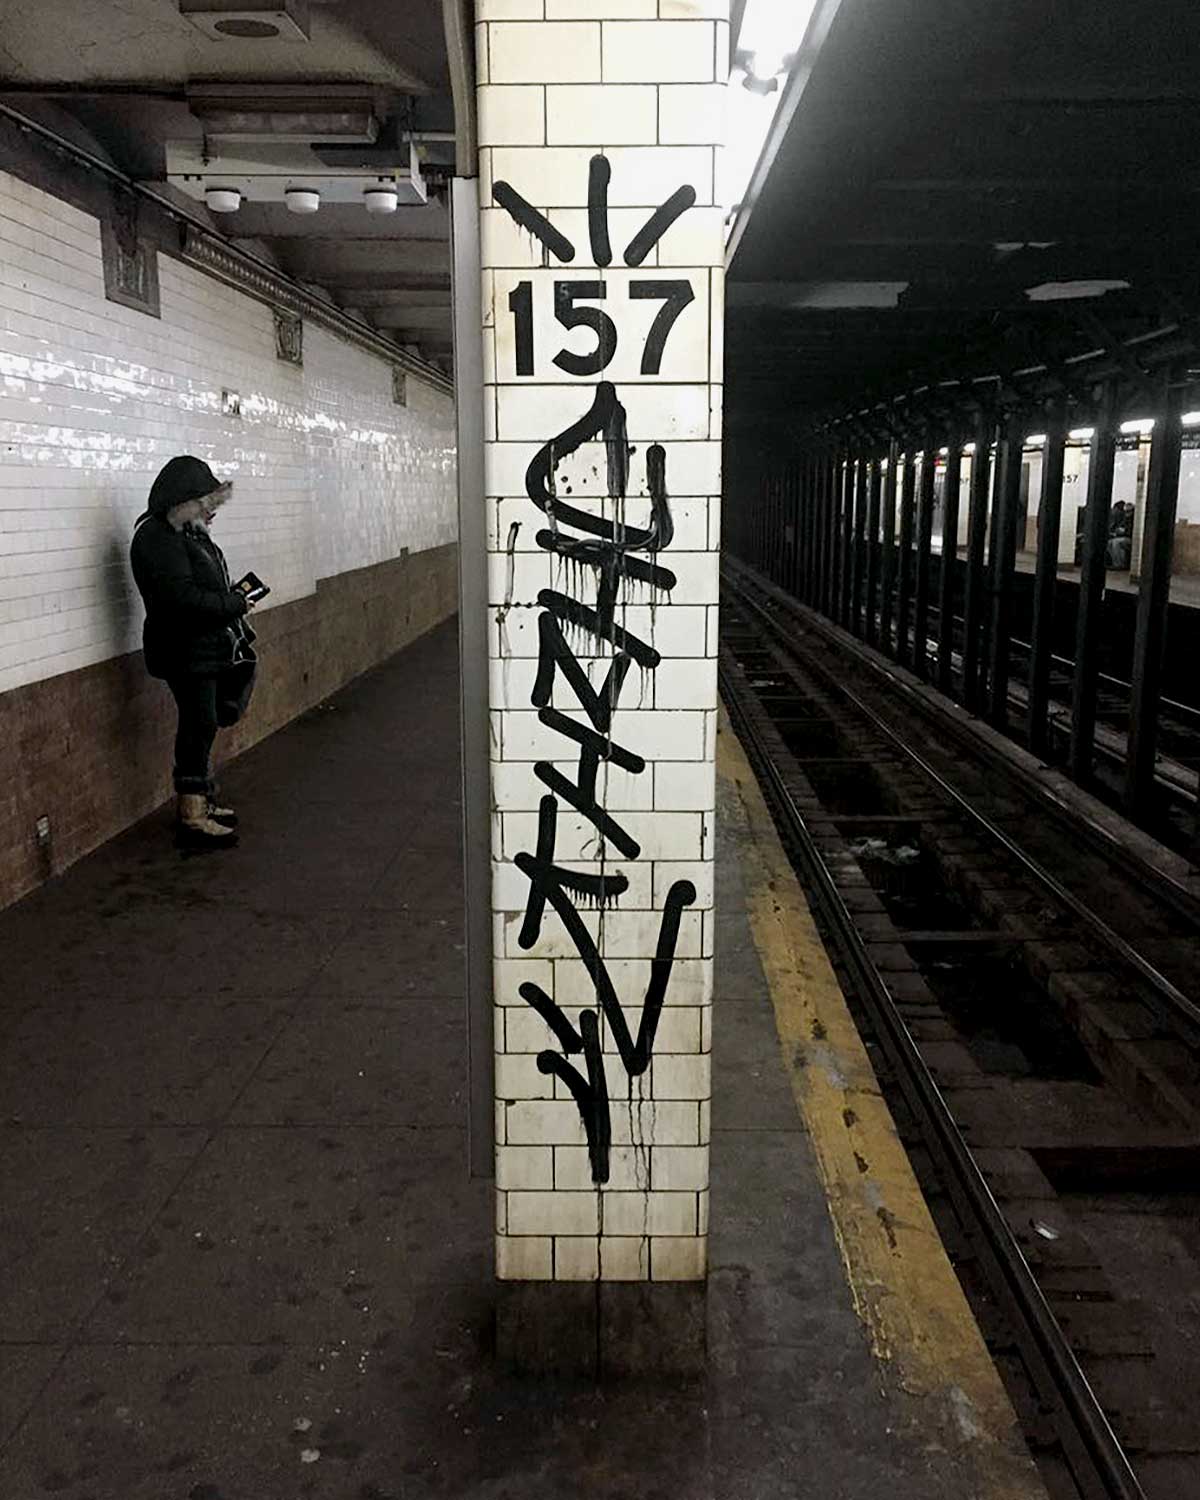 Graffiti artist Cinik handstyle tag spotted at 157 station in NYC